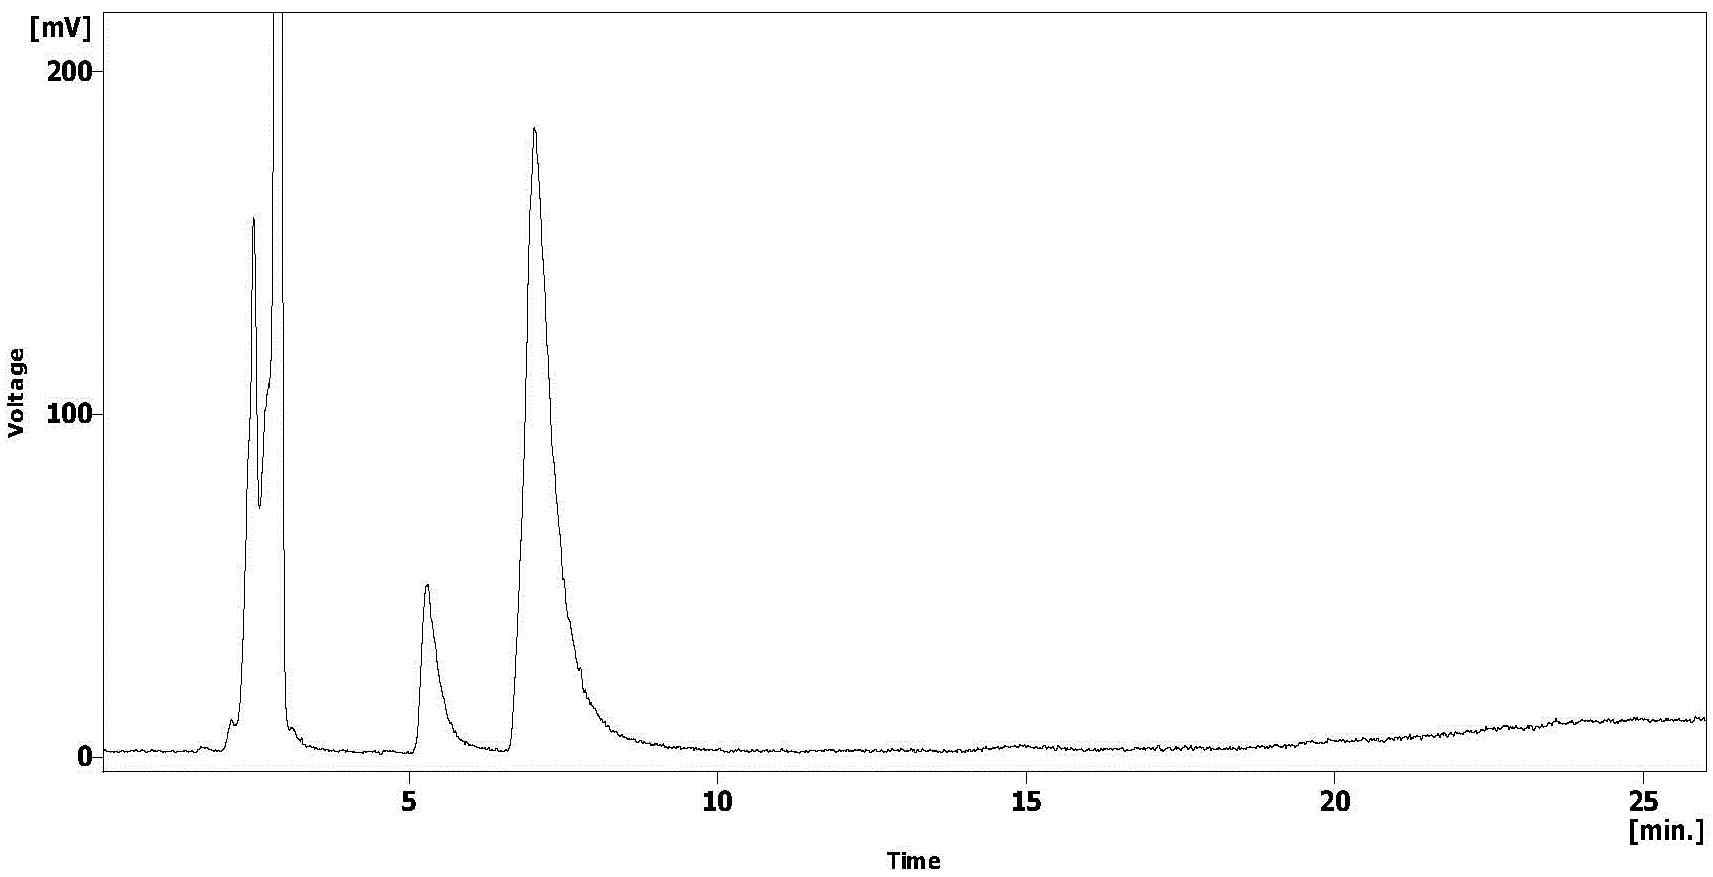 HPLC-ELSD chromatogram of the reaction products obtained by phospholipase A1-catalyzed hydrolysis of phosphatidylcholine (40g) under the optimal conditions.